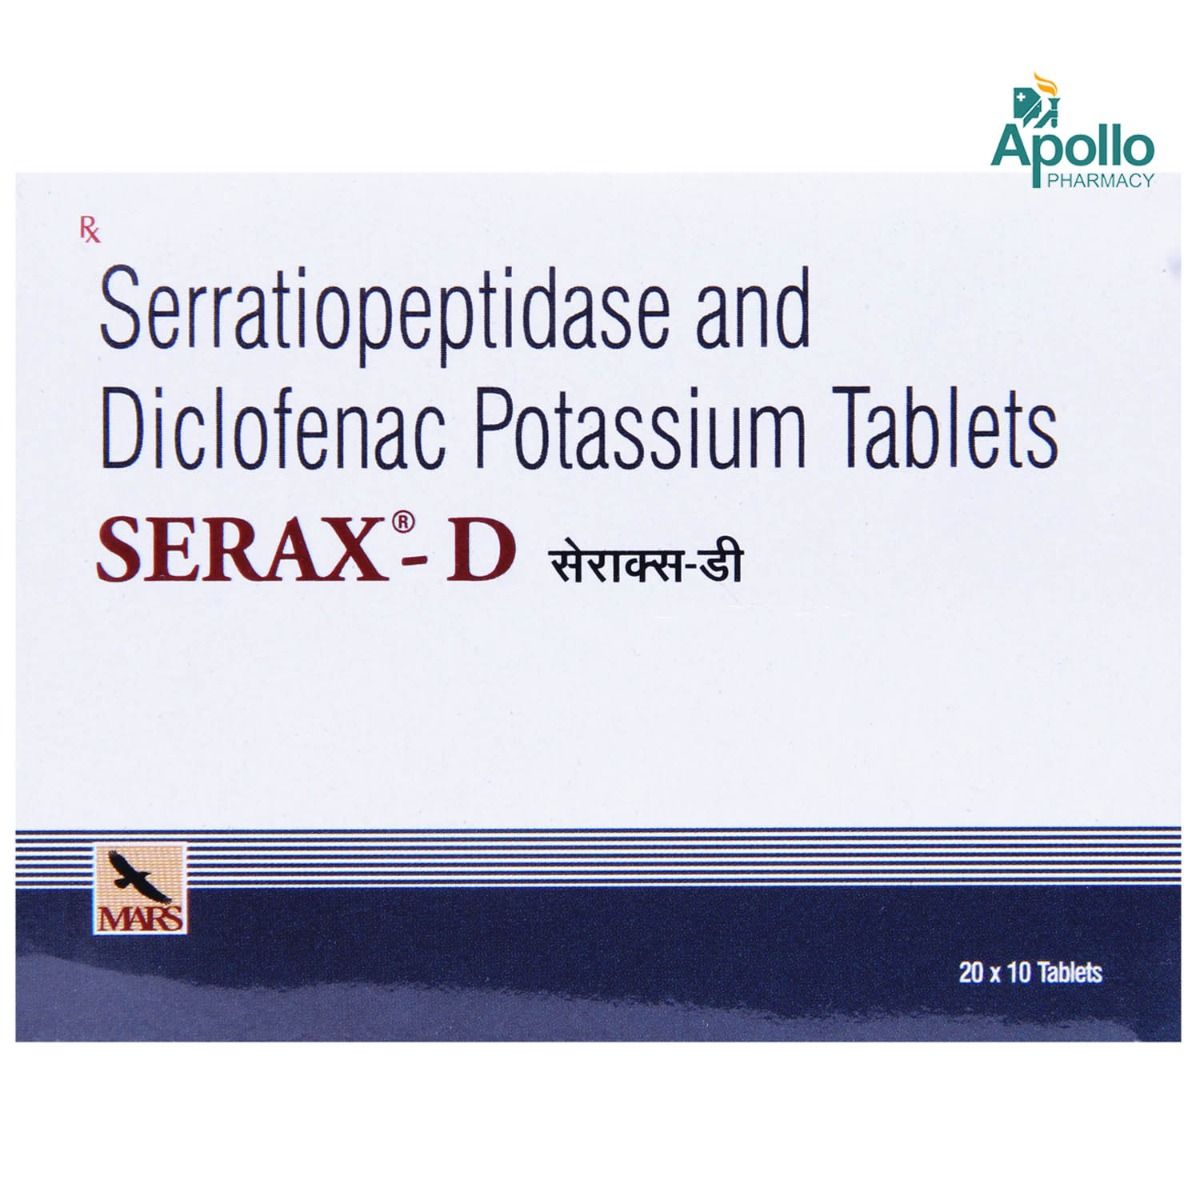 Serax-D Tablet 10's Price, Uses, Side Effects, Composition ...